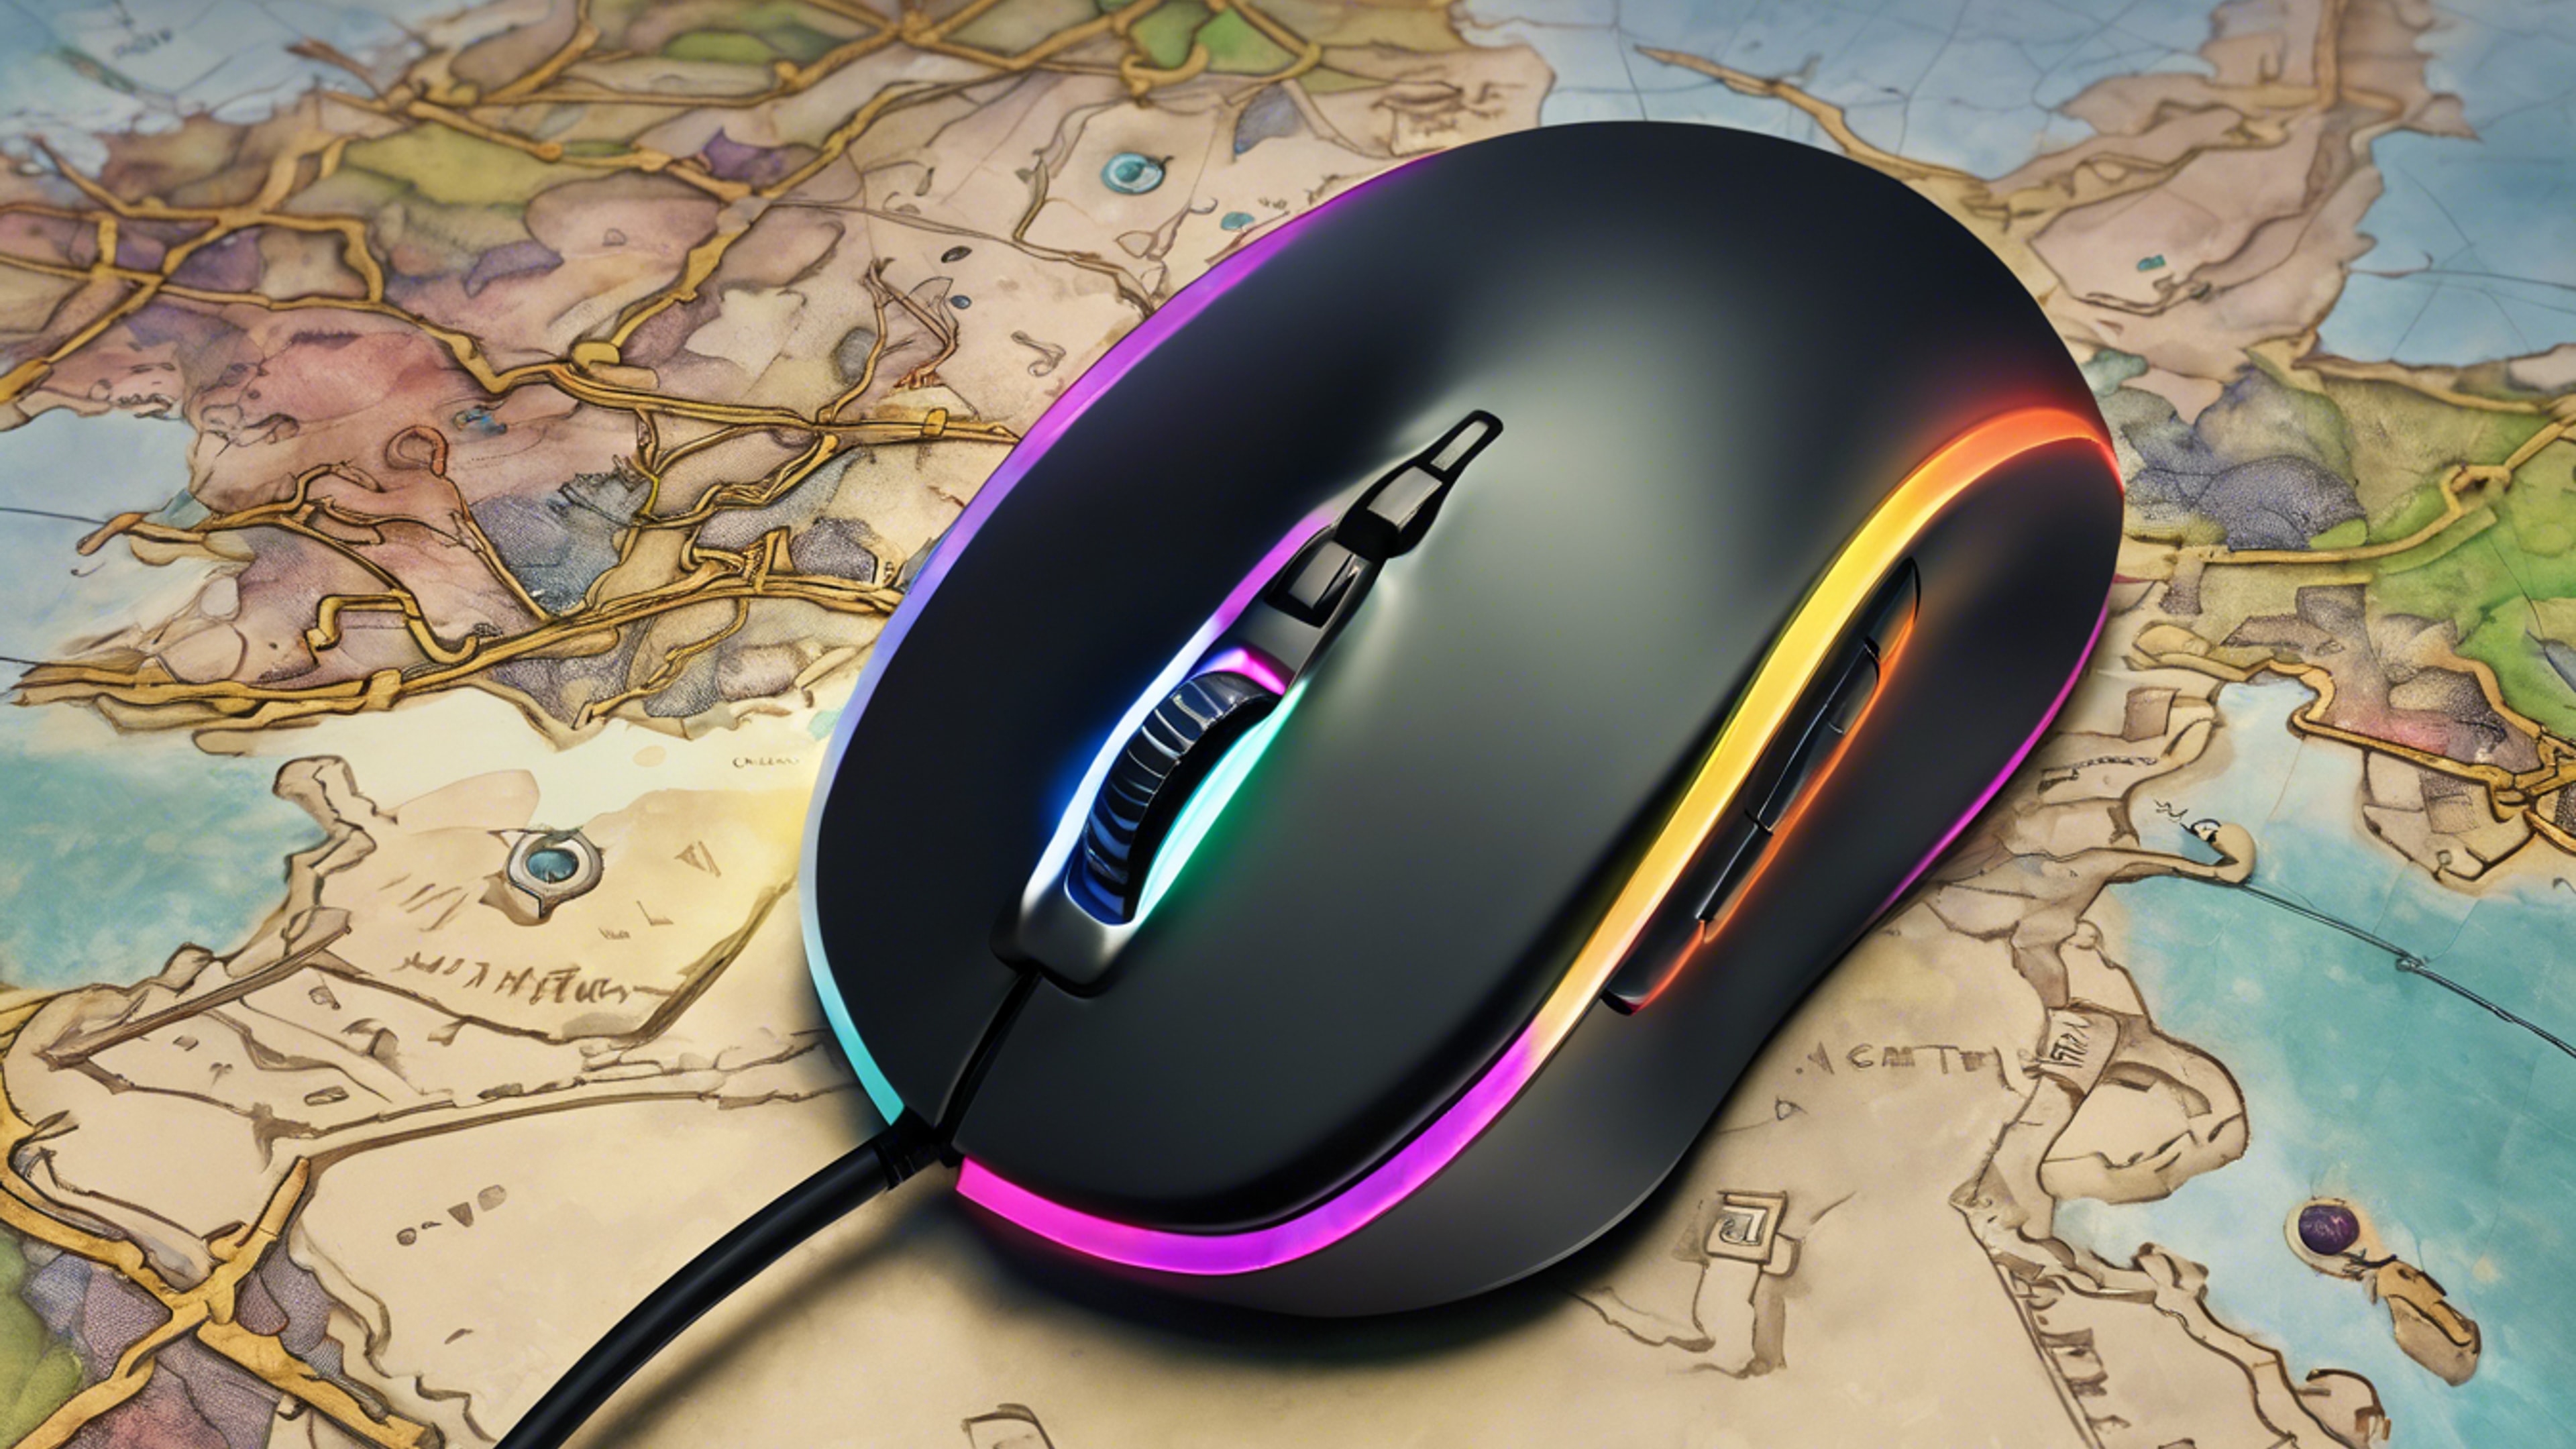 A close up of black gaming mouse with multicoloured lights, placed on a mouse pad with a map of a fantasy world. ផ្ទាំង​រូបភាព[91f93c56765f47f0bd9c]